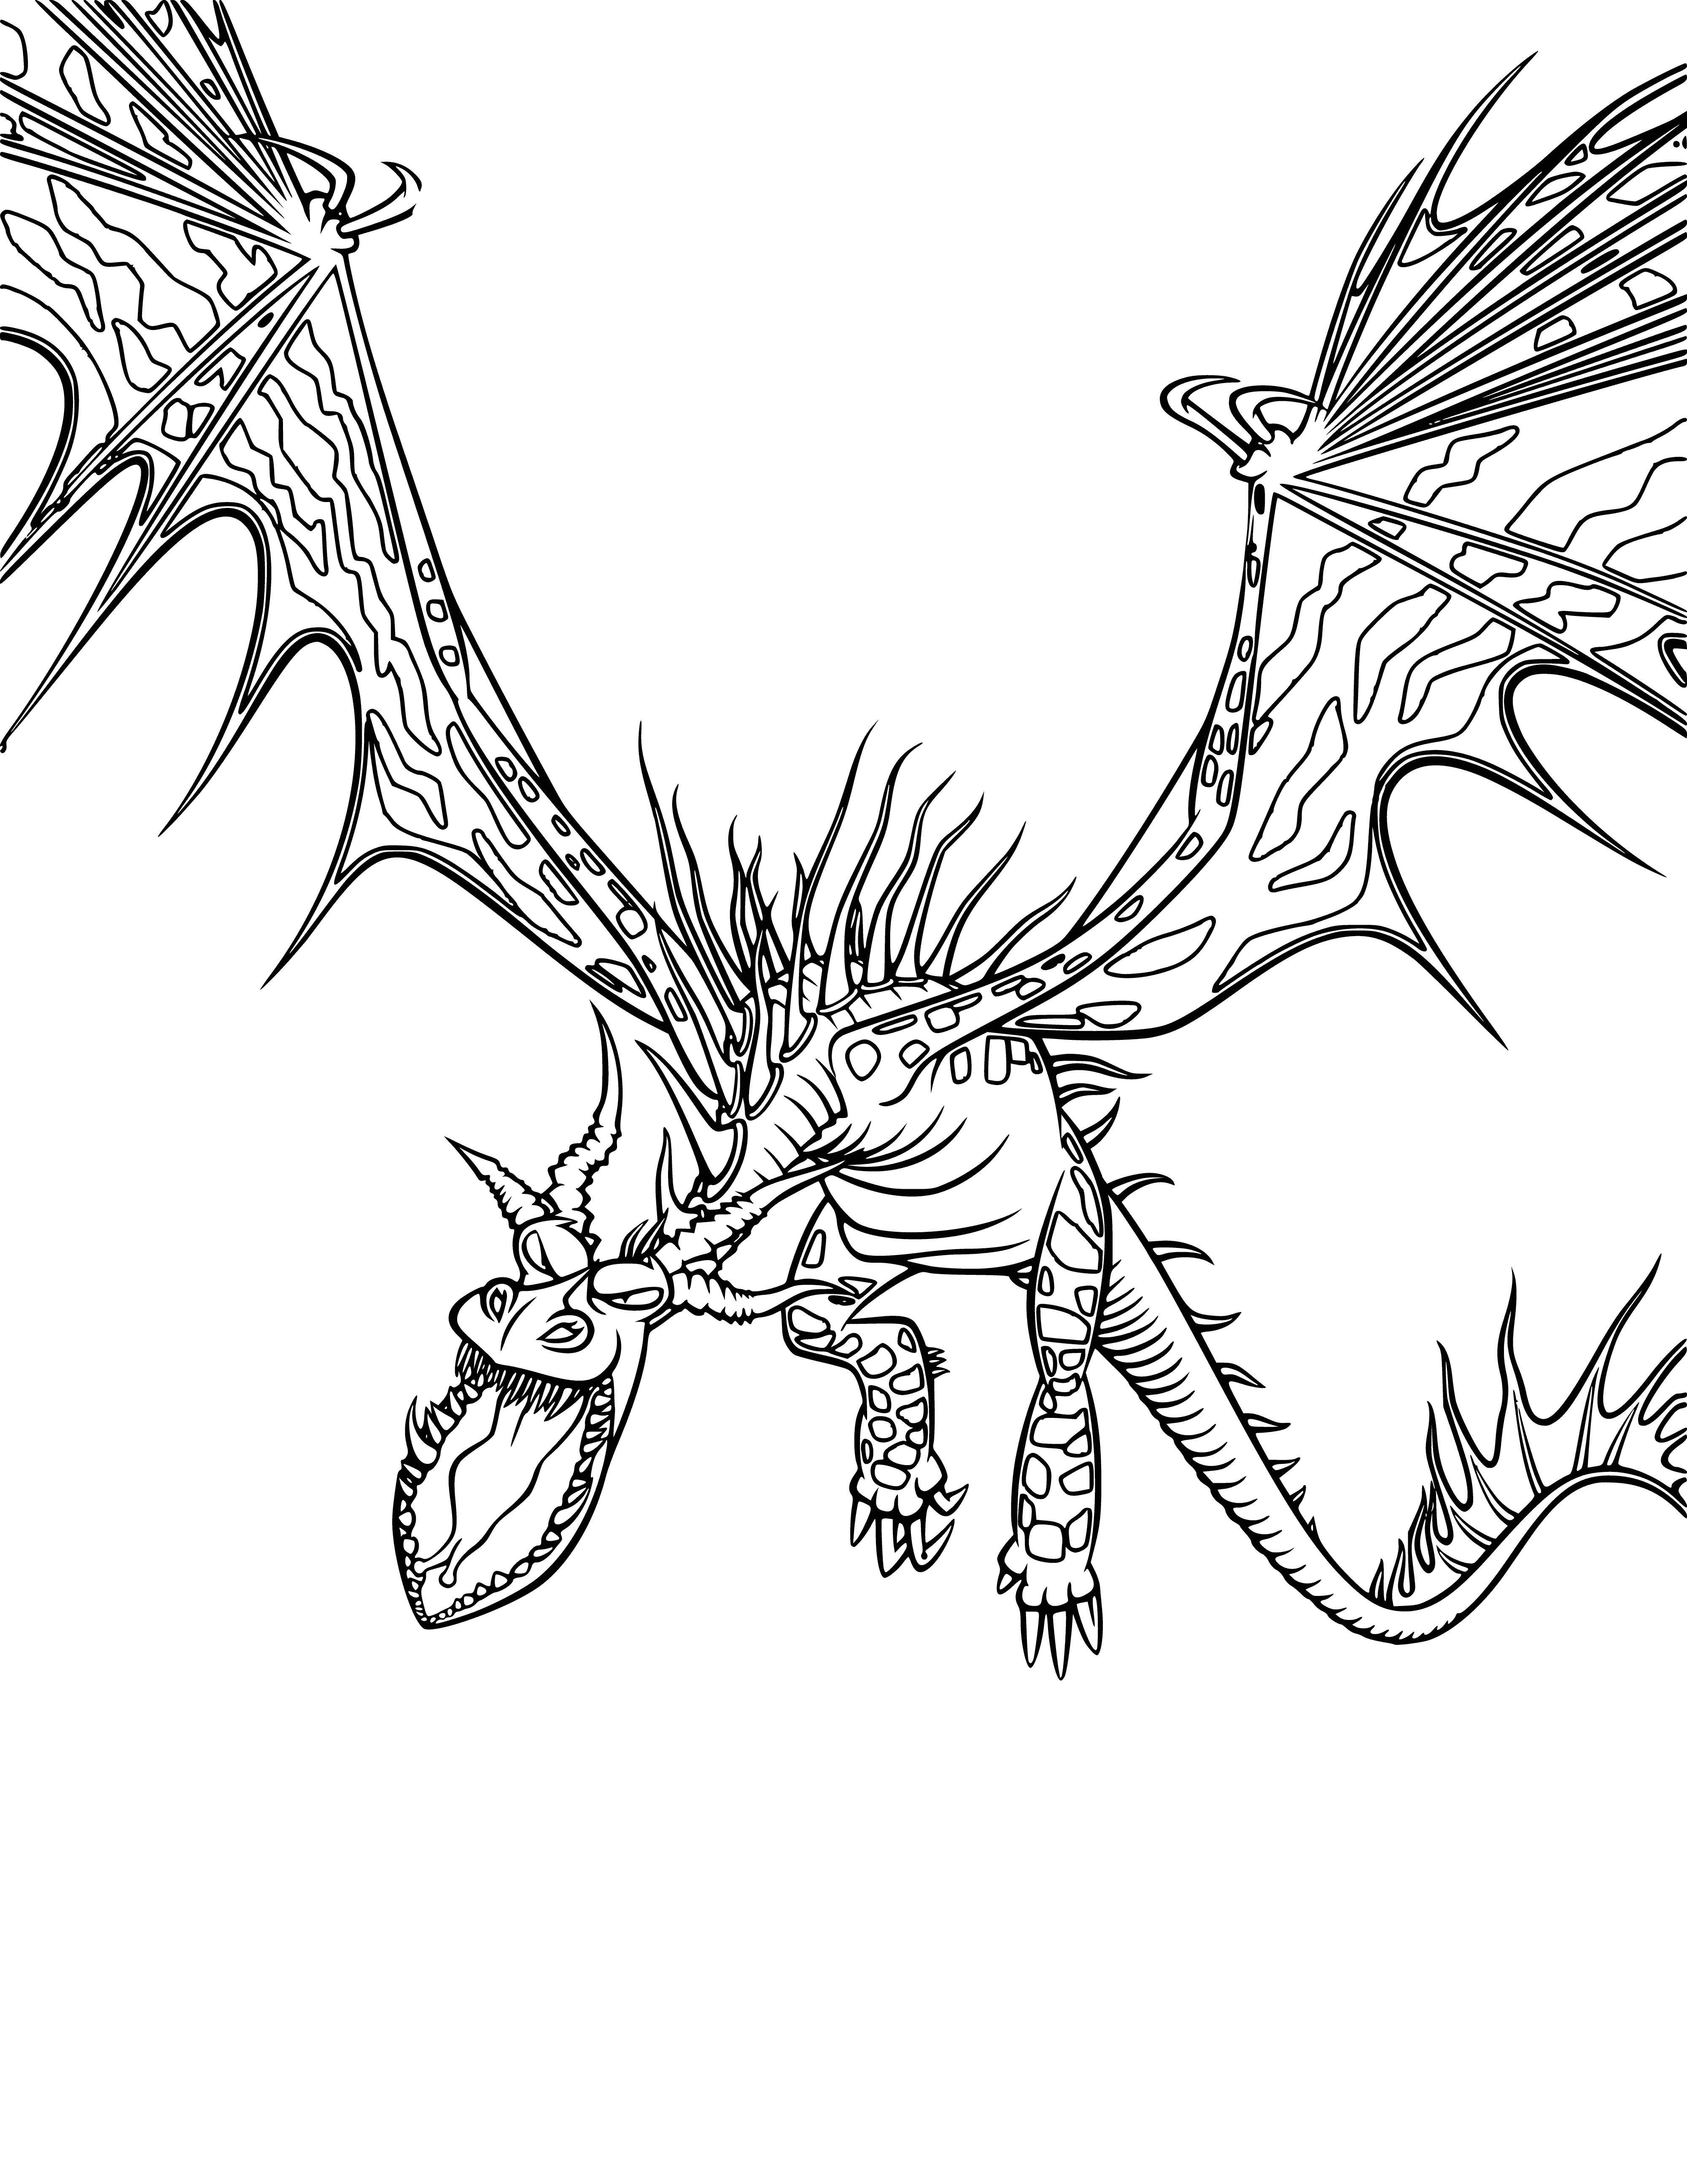 coloring page: Dragon rider breathes fire on city from atop blue dragon with deadly wings and teeth.